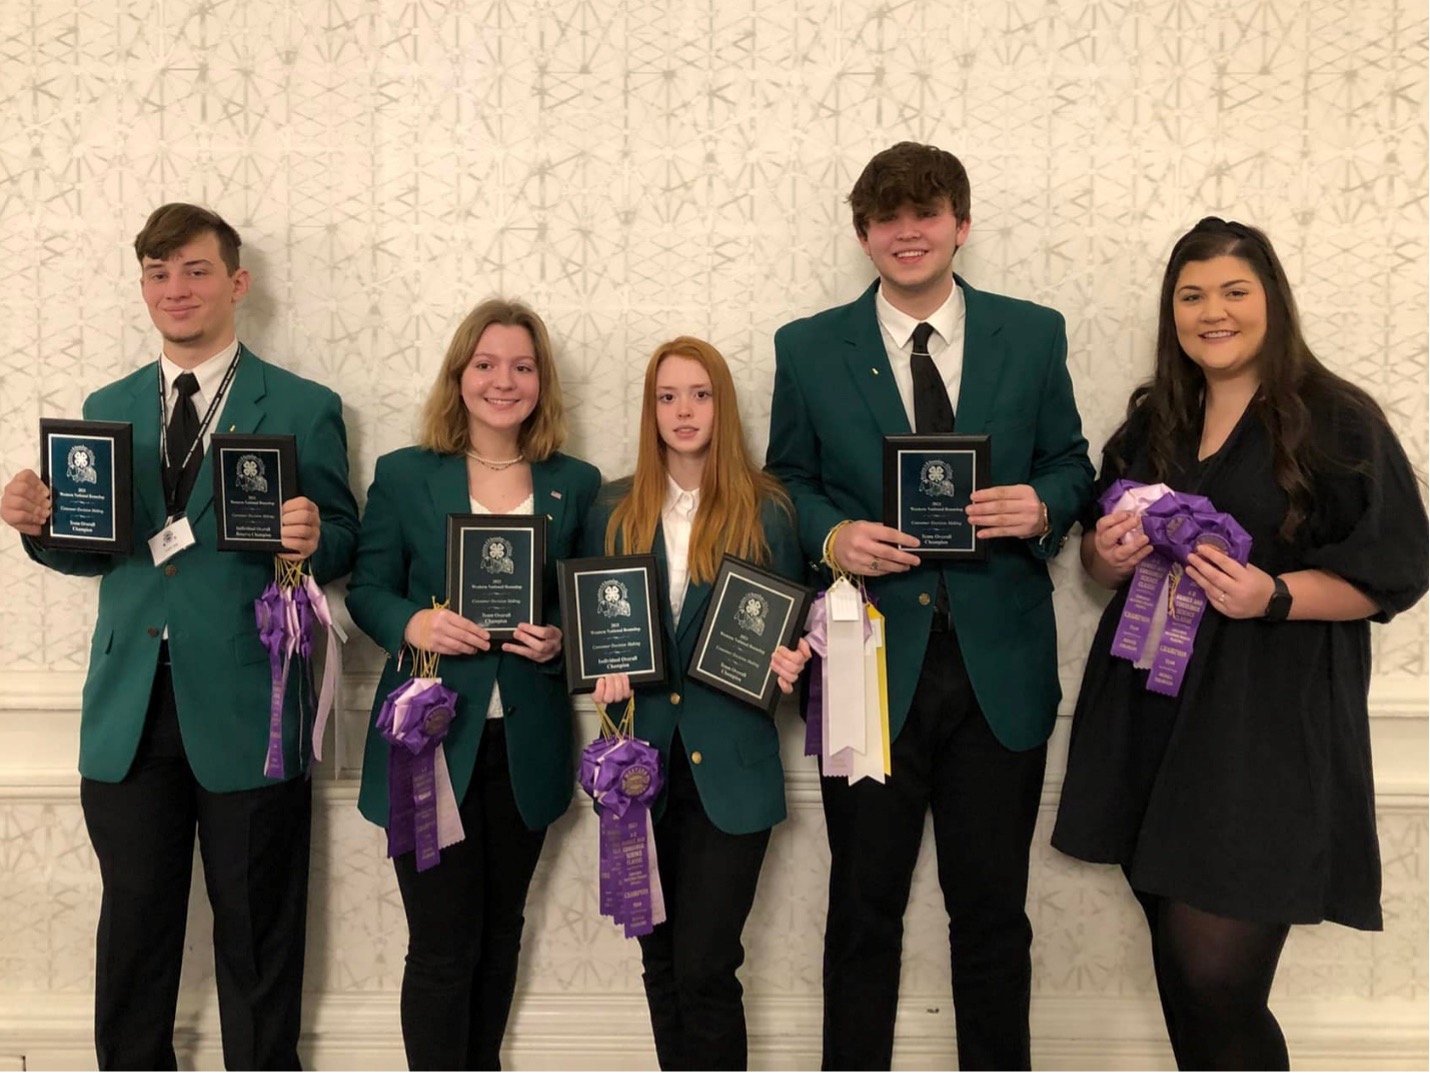 Ben Hill County swept the National Consumer Decision Making contest in Denver, Colorado. Team members (left to right) Liam Jay, Ashley Braddy, Lauren Wixson and Timothy Lord display their awards with coach Laura Lee Williams, Ben Hill County Extension 4-H Agent.